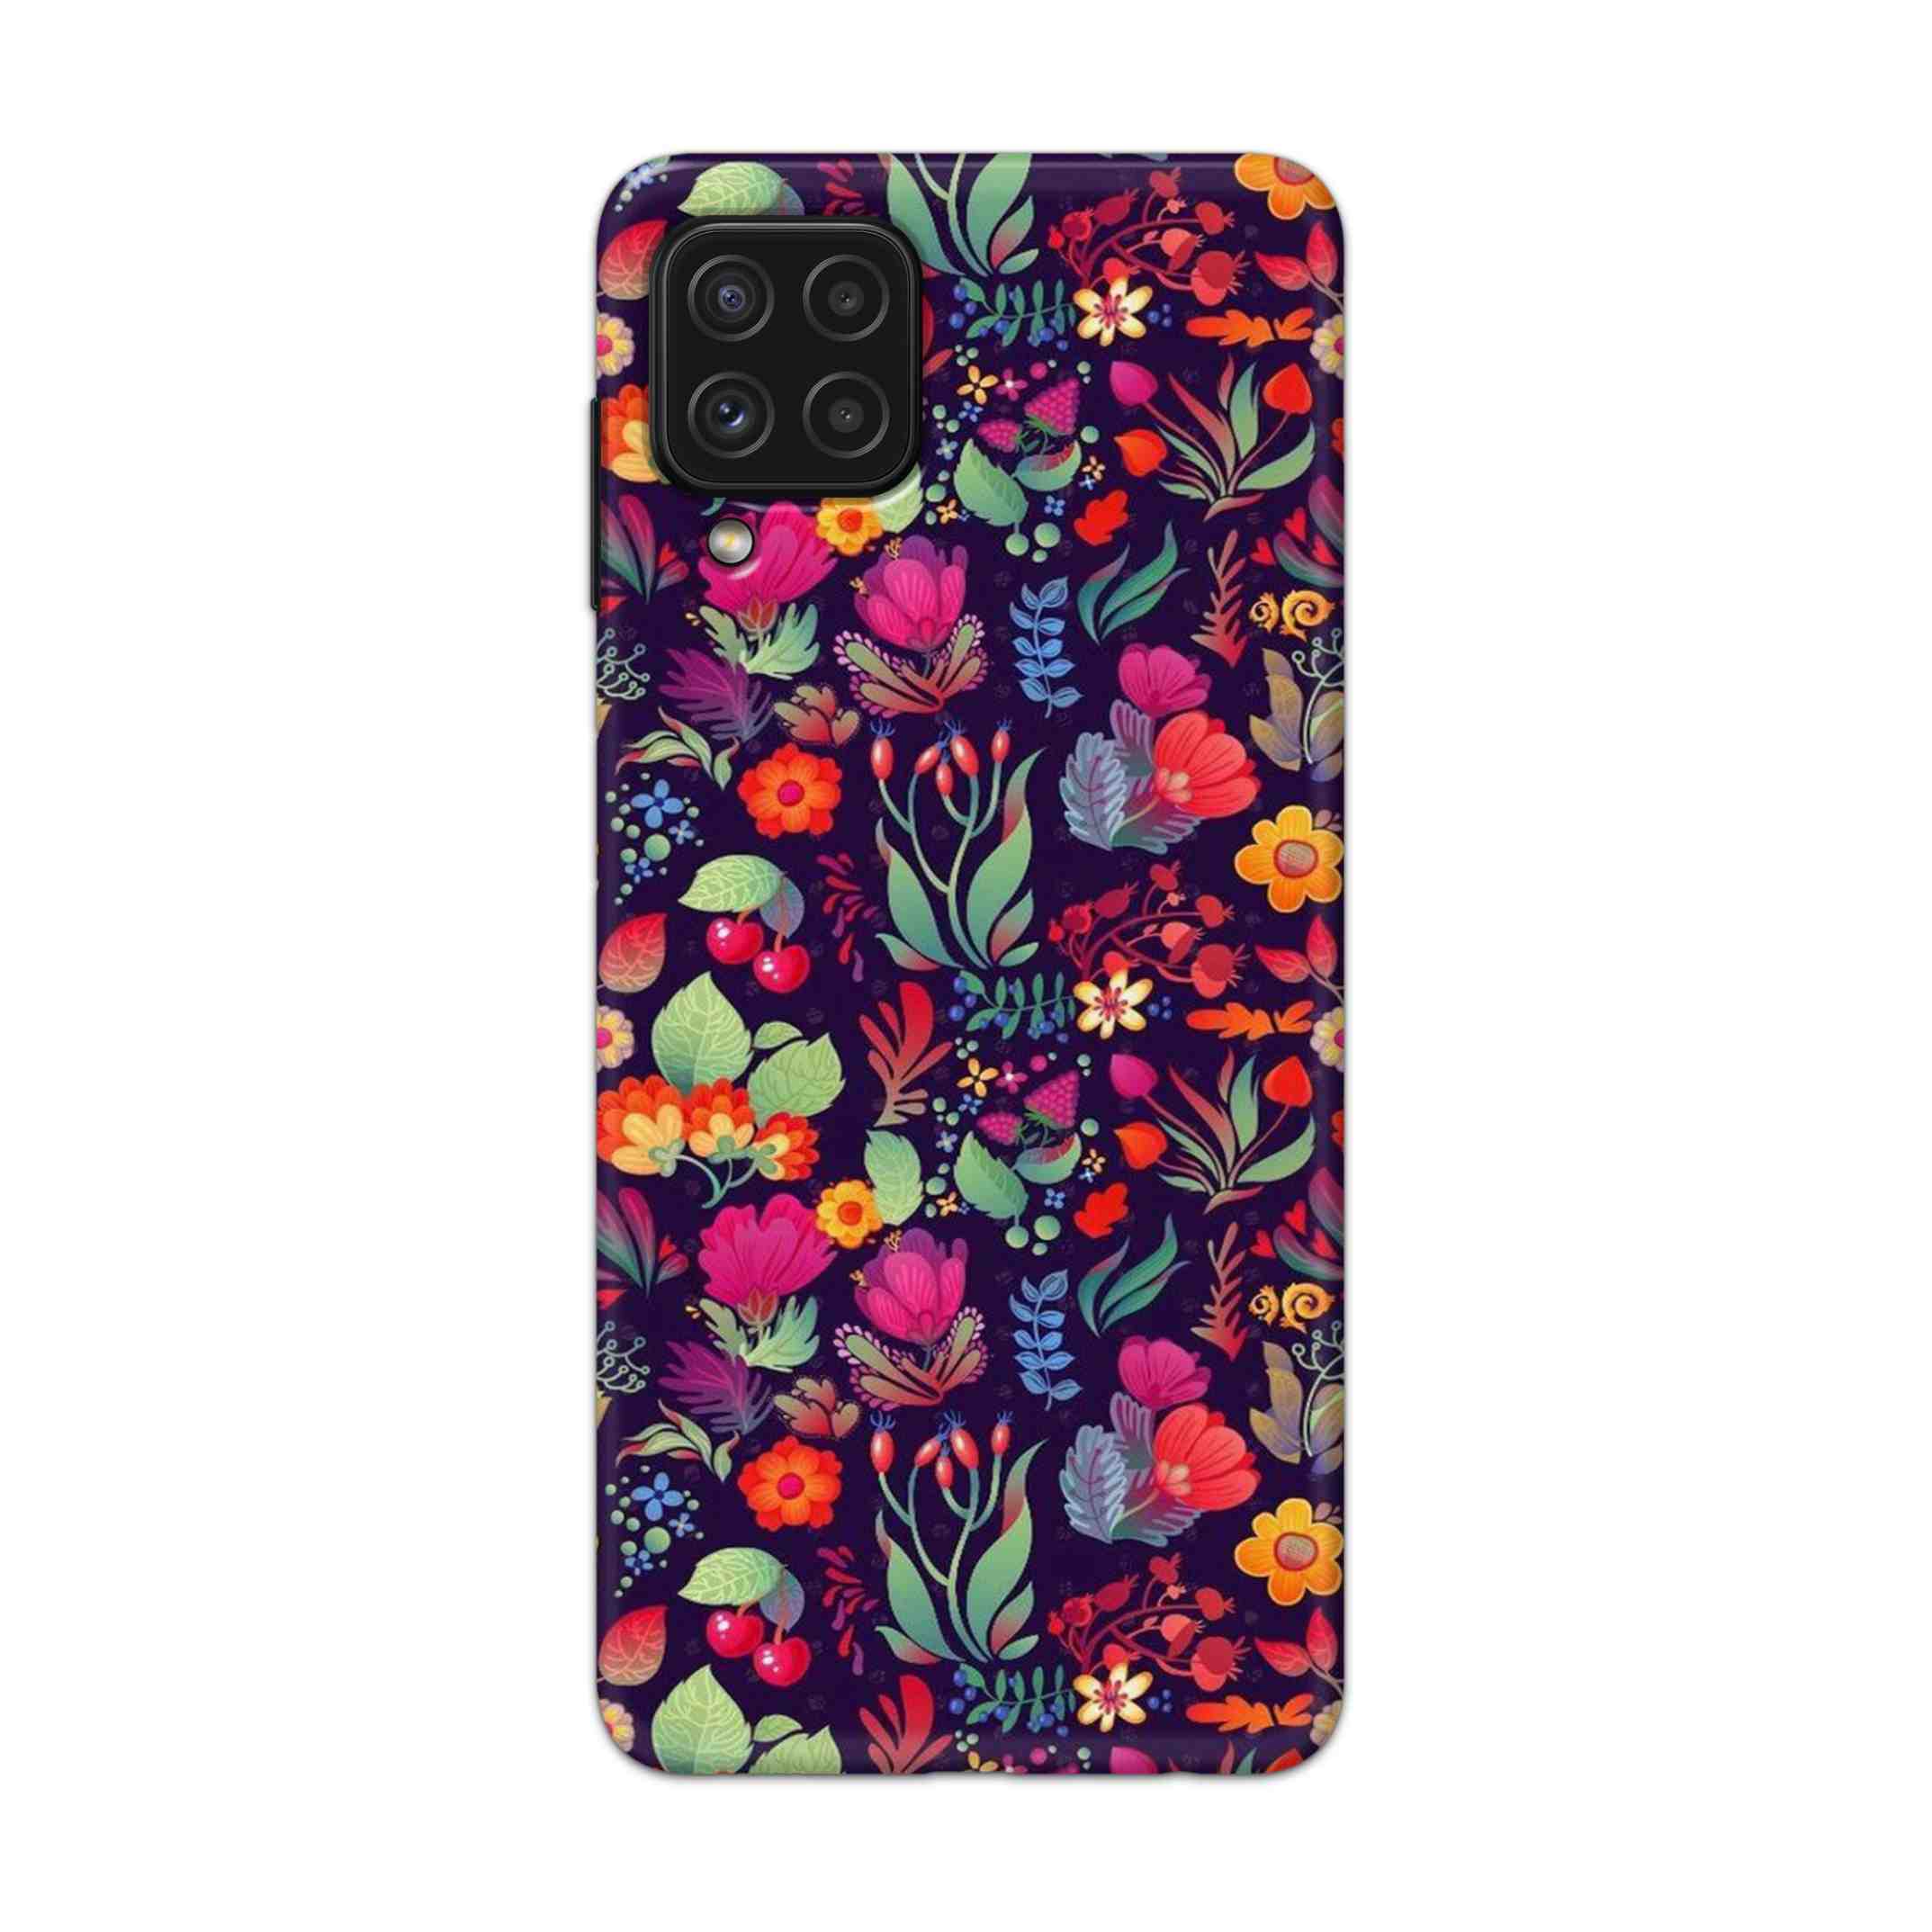 Buy Fruits Flower Hard Back Mobile Phone Case Cover For Samsung Galaxy A22 Online